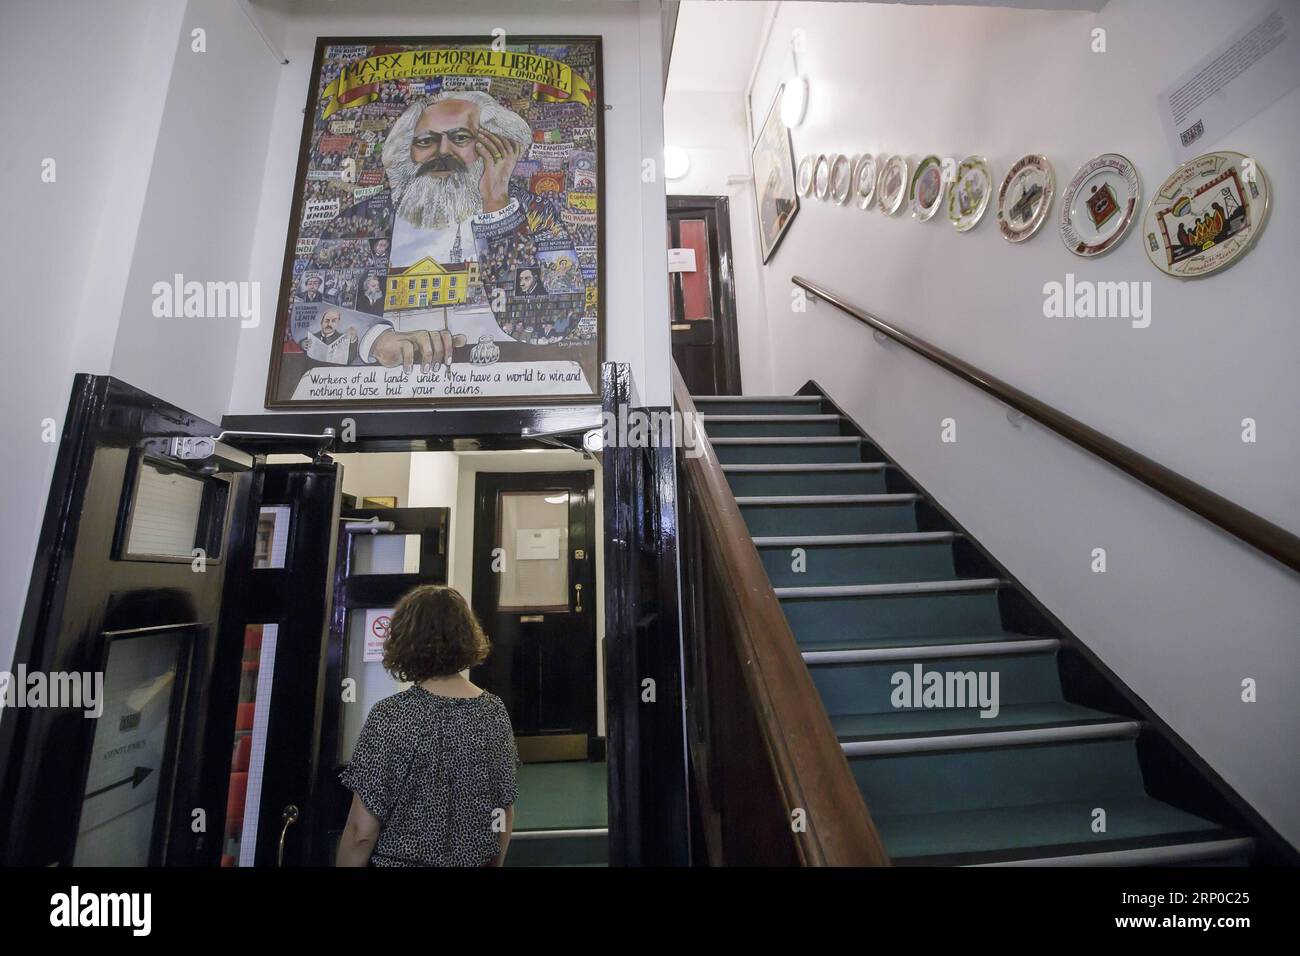 (180504) -- LONDON, May 4, 2018 -- A volunteer walks through the entrance of the Marx Memorial Library and Workers School in London, Britain, May 4, 2018. Established in 1933 on the 50th anniversary of the death of Marx, the Marx Memorial Library and Workers School has been the intellectual home of generations of scholars interested in studying Marxism, trade unionism, and the working class movement. ) BRITAIN-LONDON-MARX MEMORIAL LIBRARY AND WORKERS SCHOOL TimxIreland PUBLICATIONxNOTxINxCHN Stock Photo